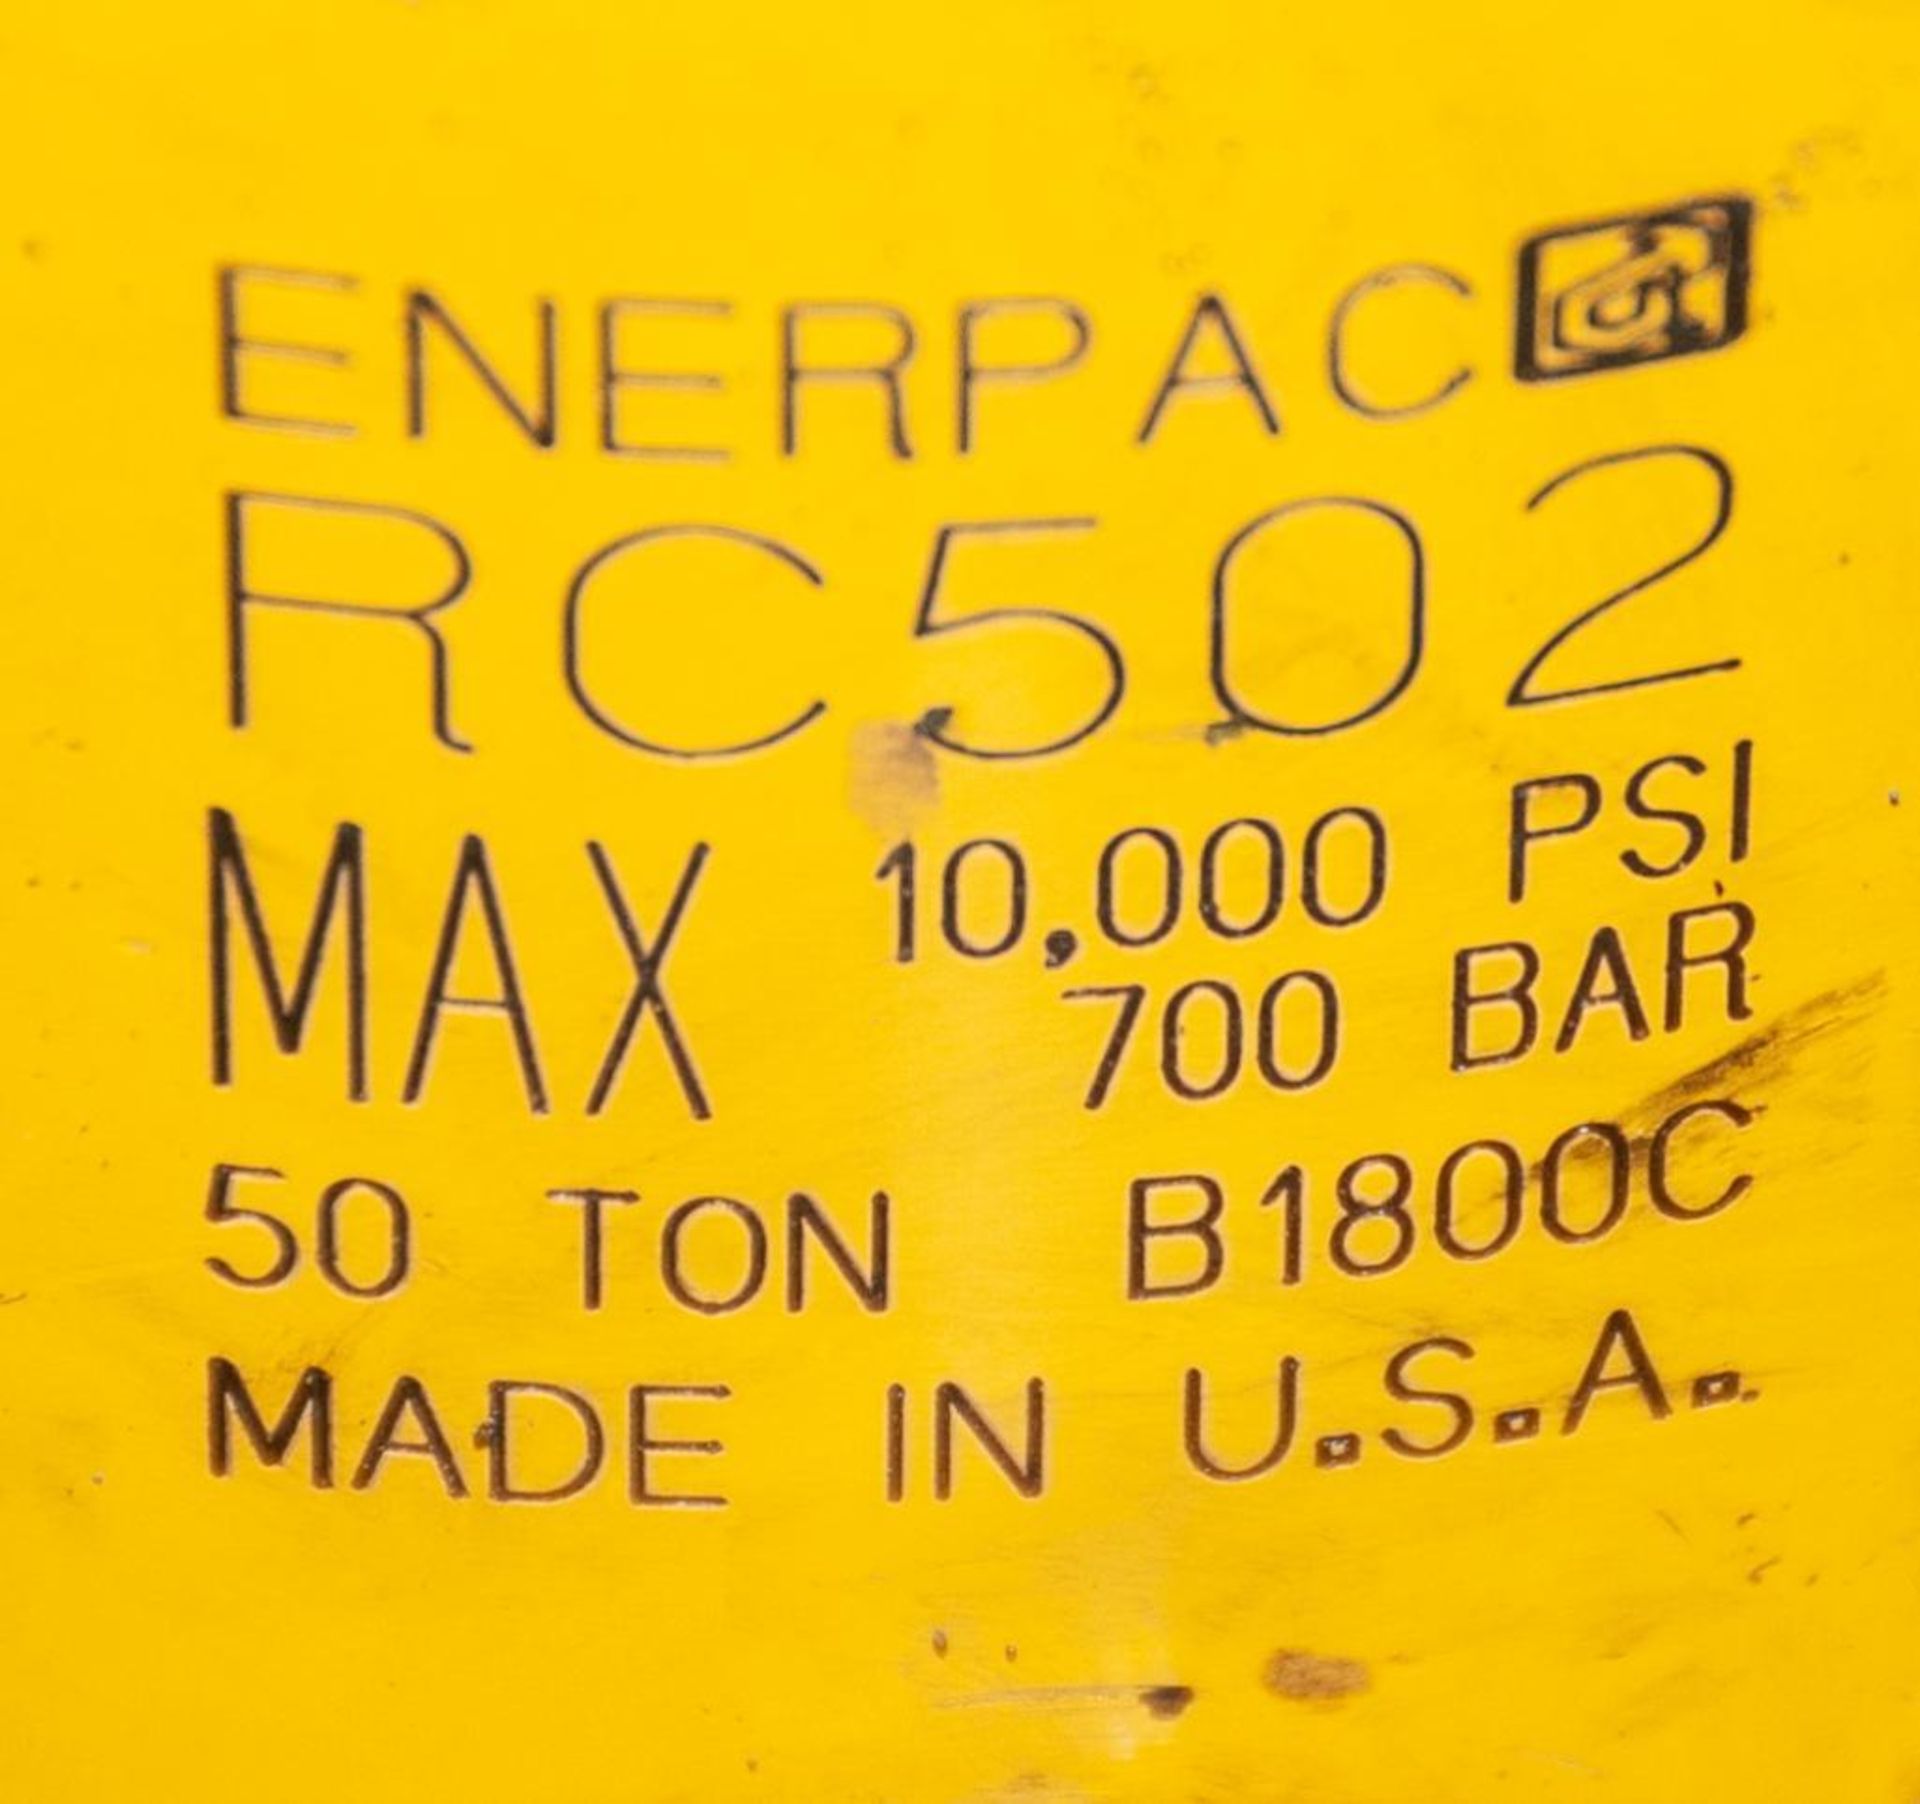 Enerpac P39 Manual Pump w/RC502, 50 Ton Cylinder RWH-120BE7C & Small Unknown Cylinder - Image 4 of 4